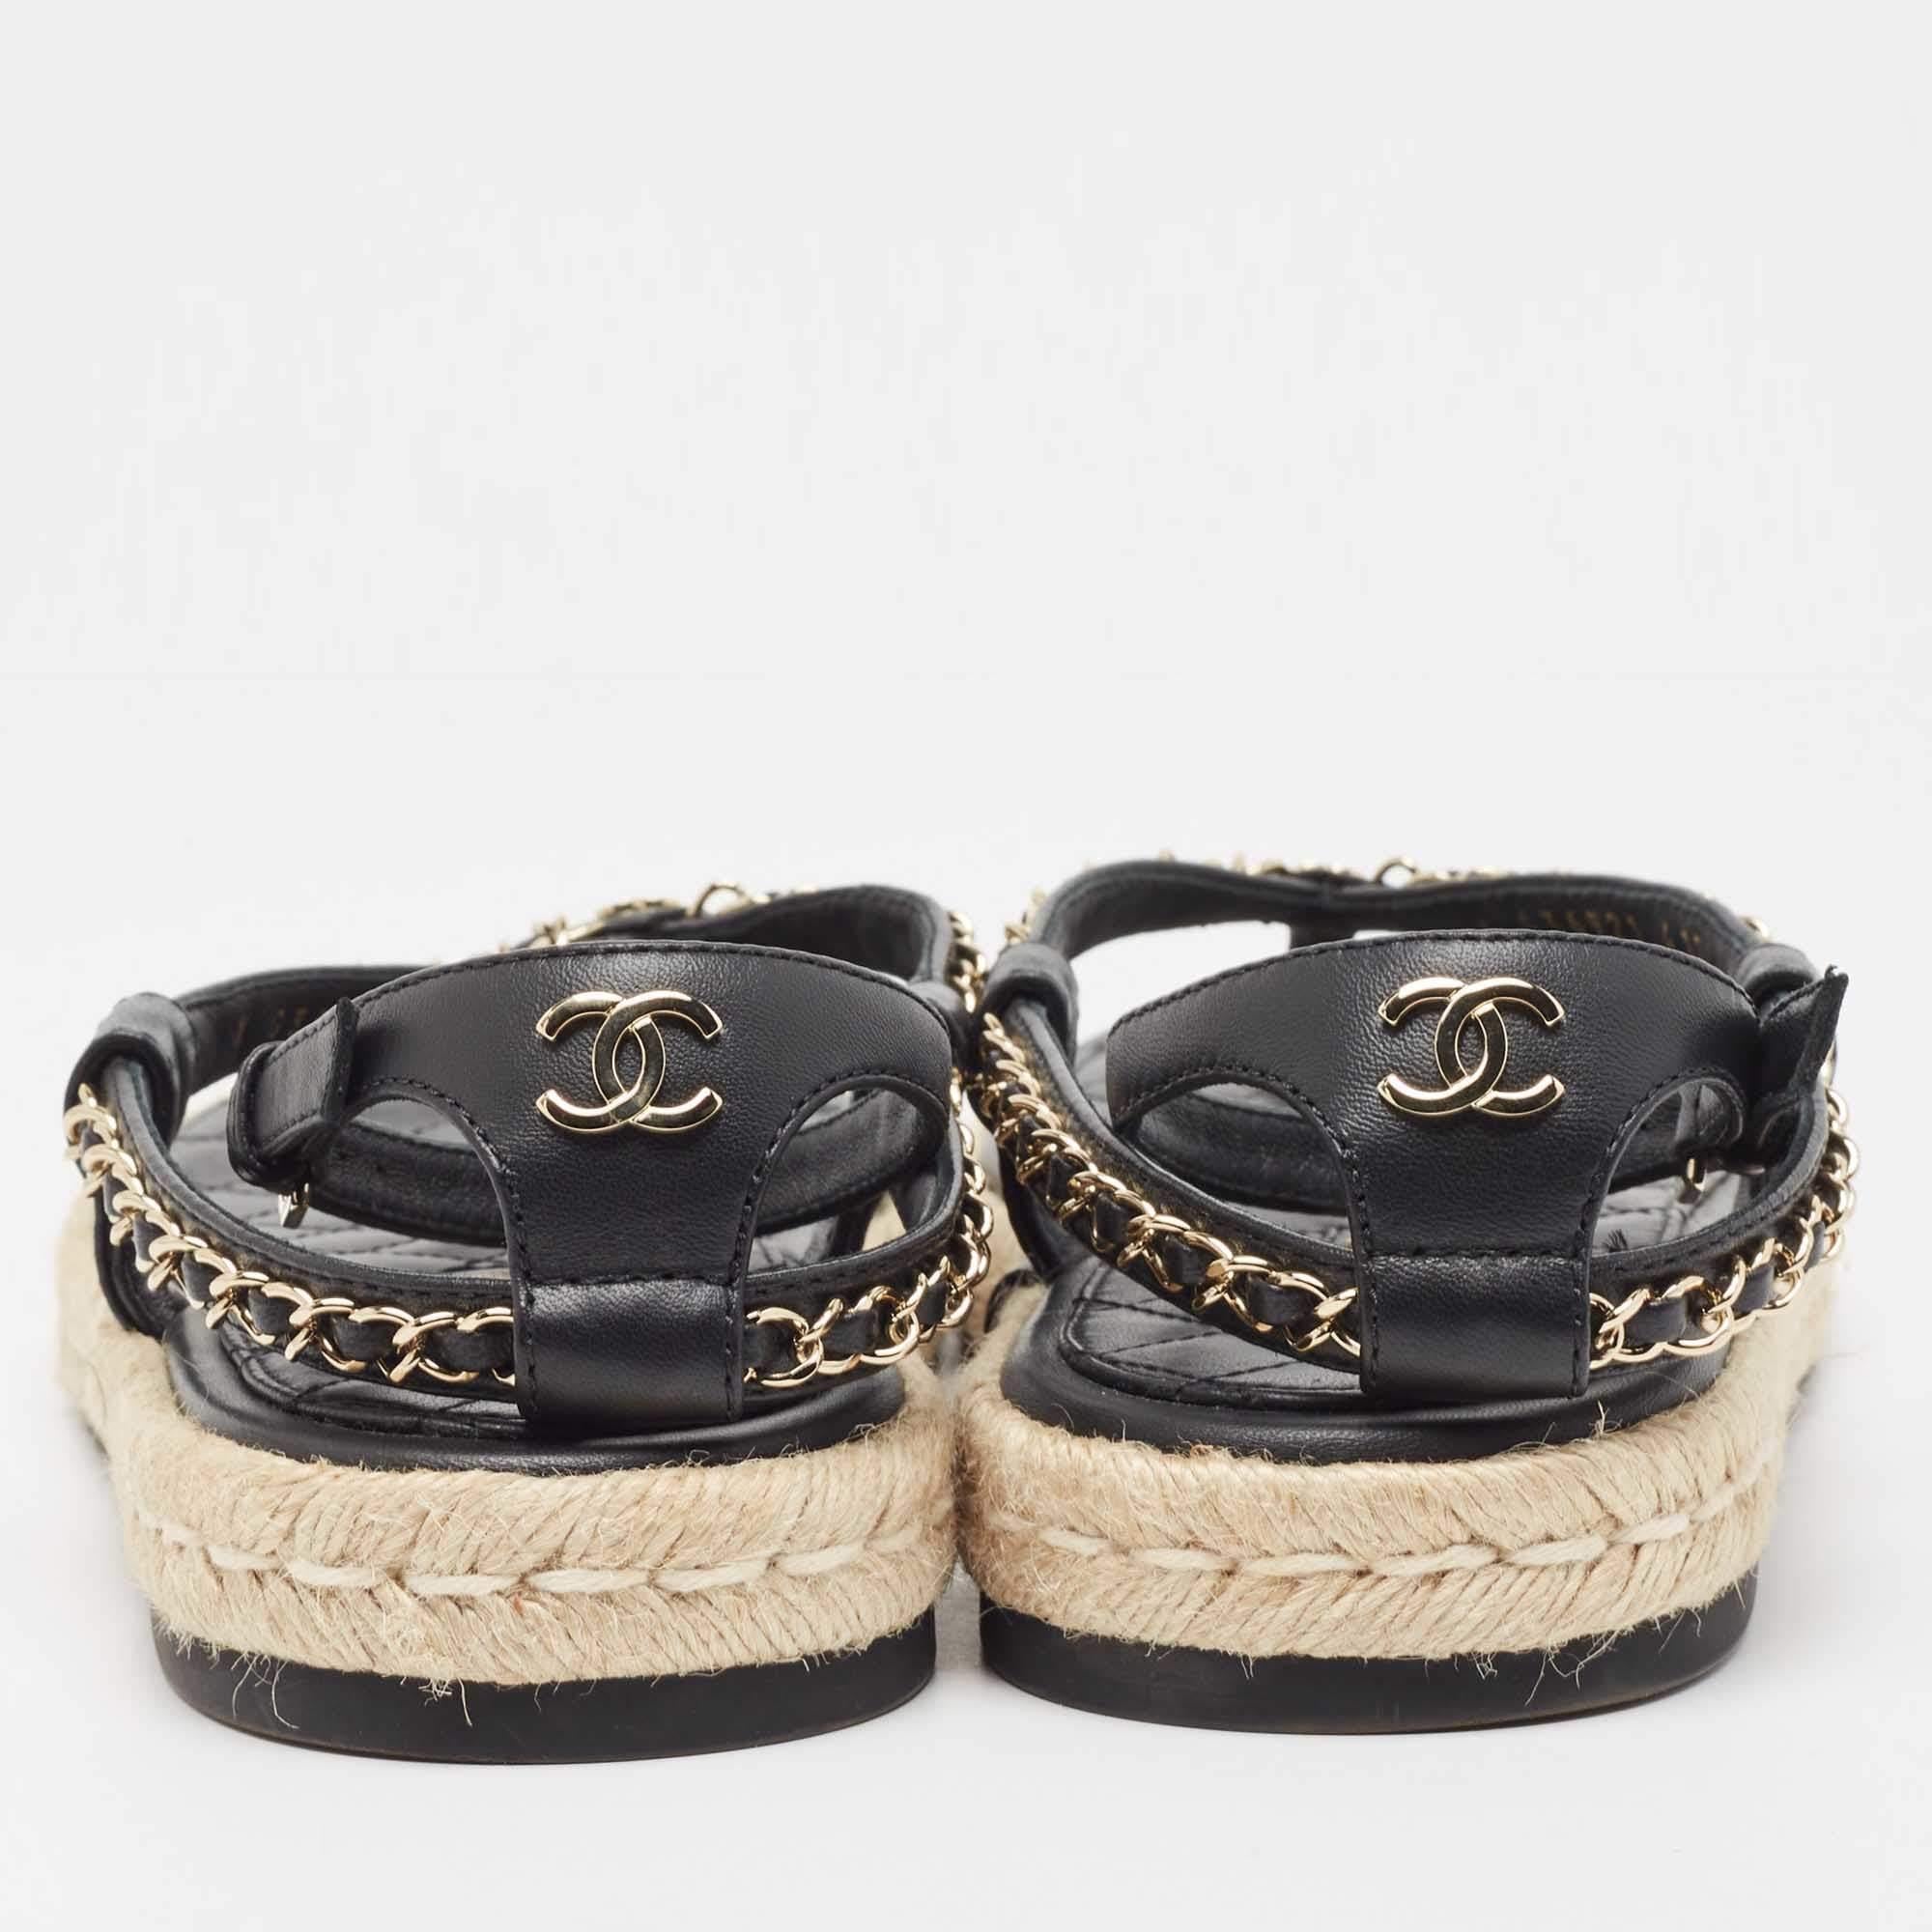 Chanel Black Leather Chain Link CC Espadrille Ankle Strap Thong Sandals Size 41 1